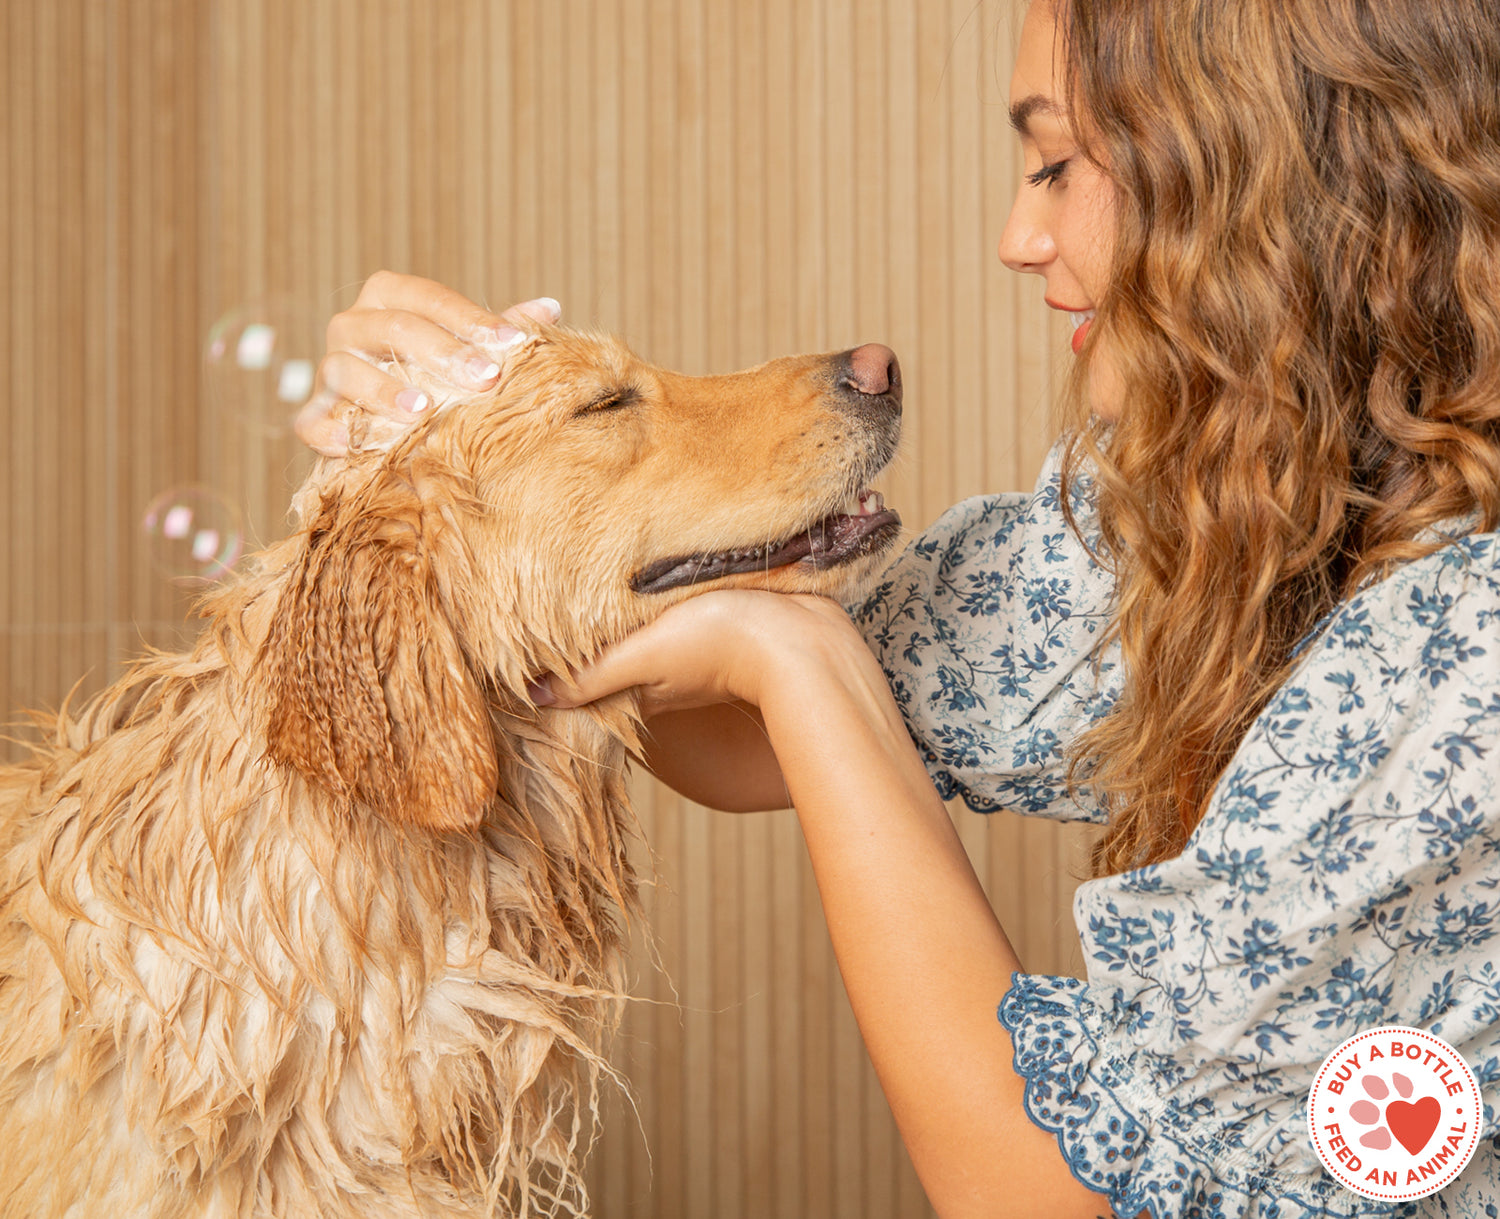 woman shampoos golden retriever with Skout's Honor Shampoo and conidtioner